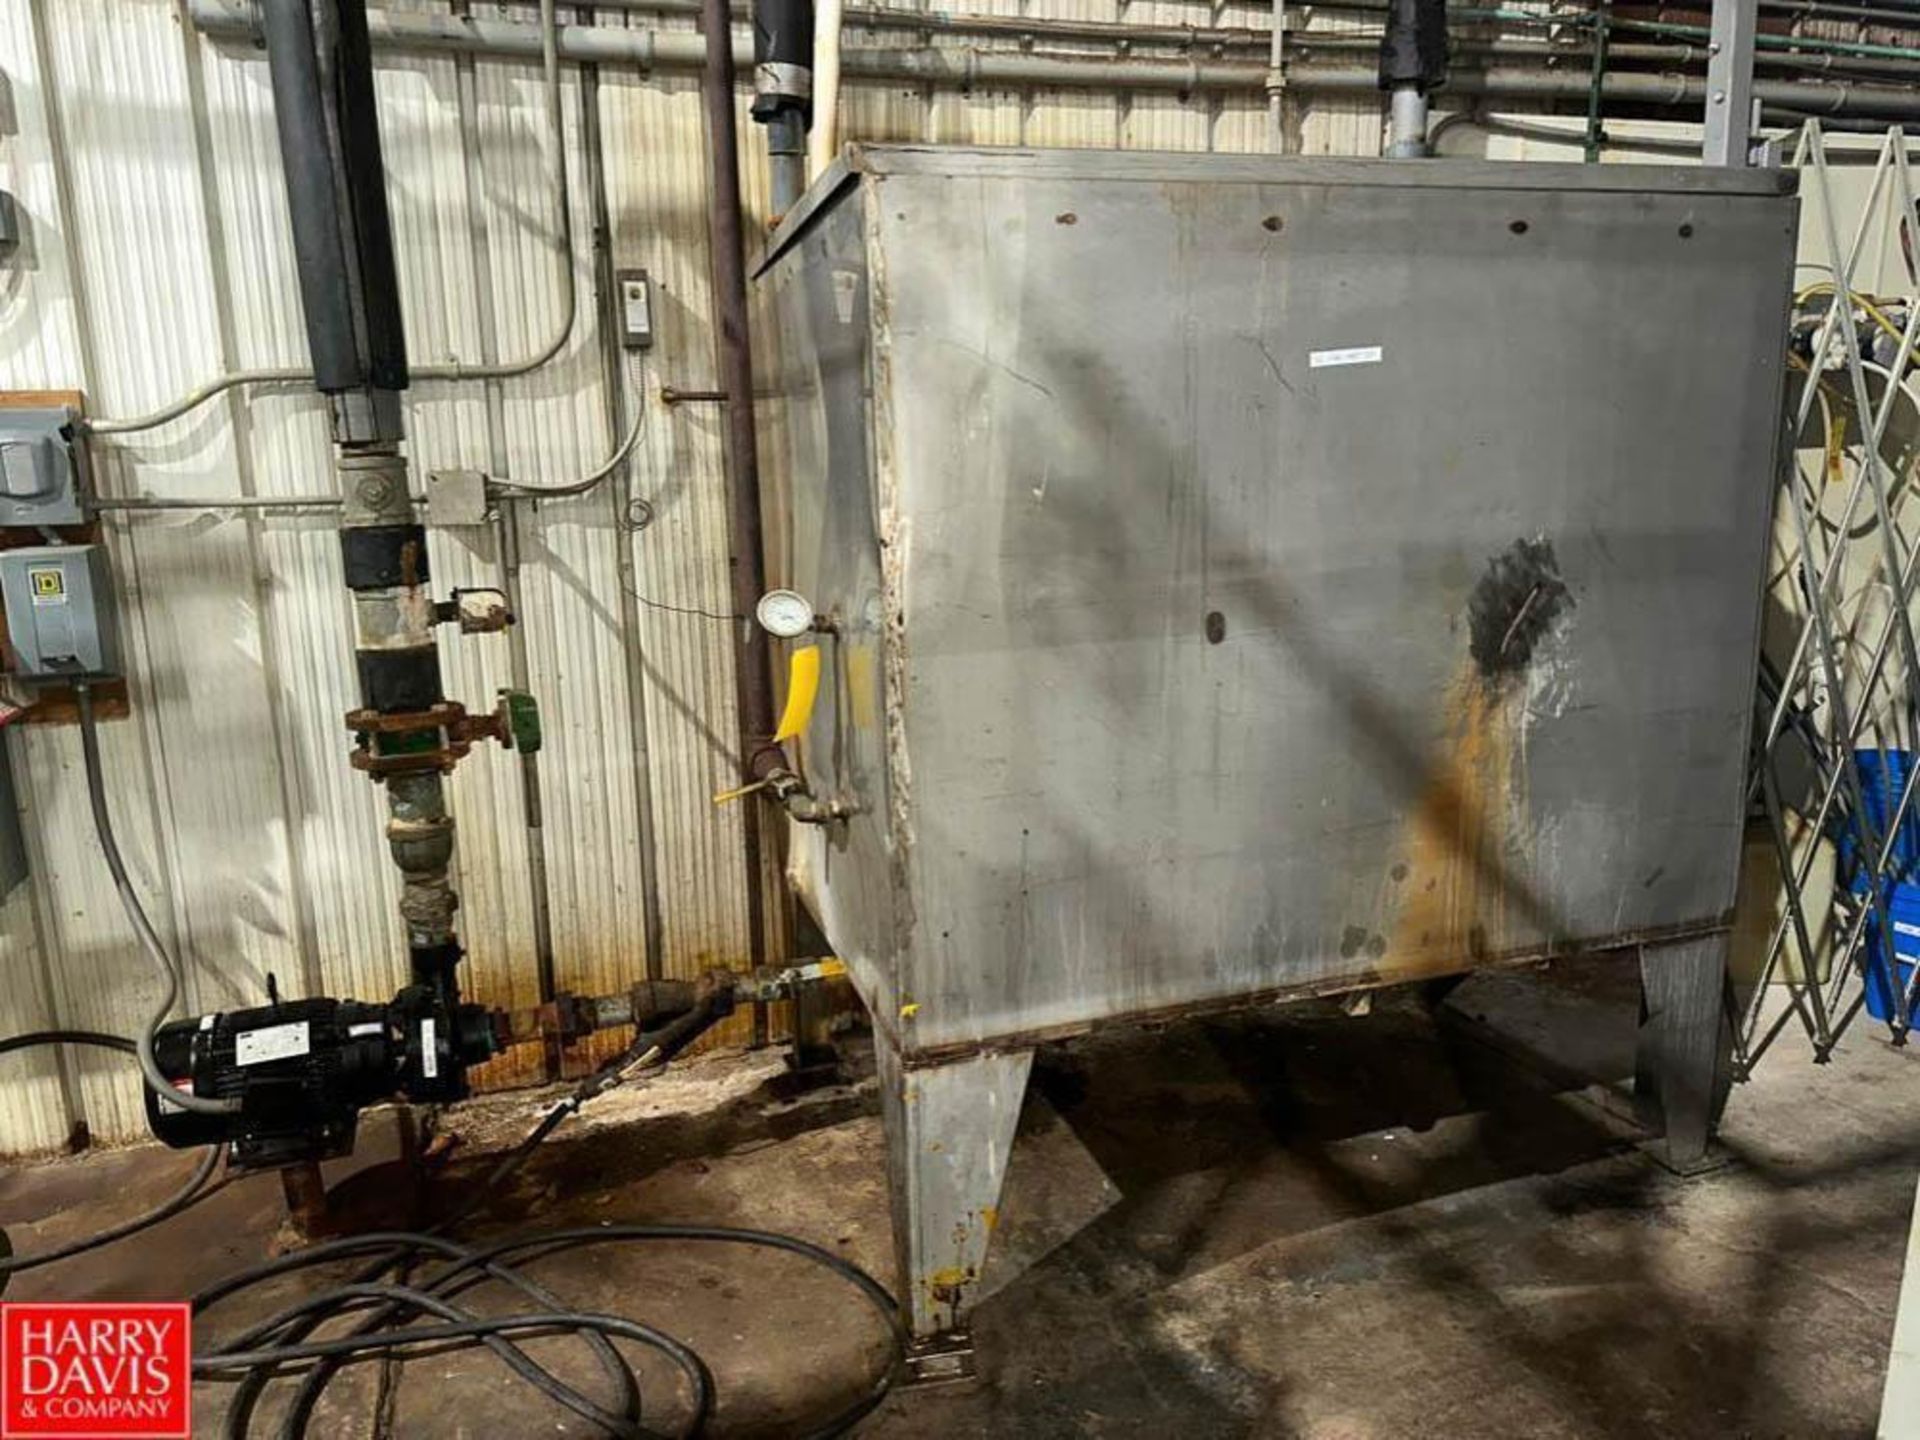 500 Gallon S/S Tank with 5 HP Pump - Rigging Fee: $750